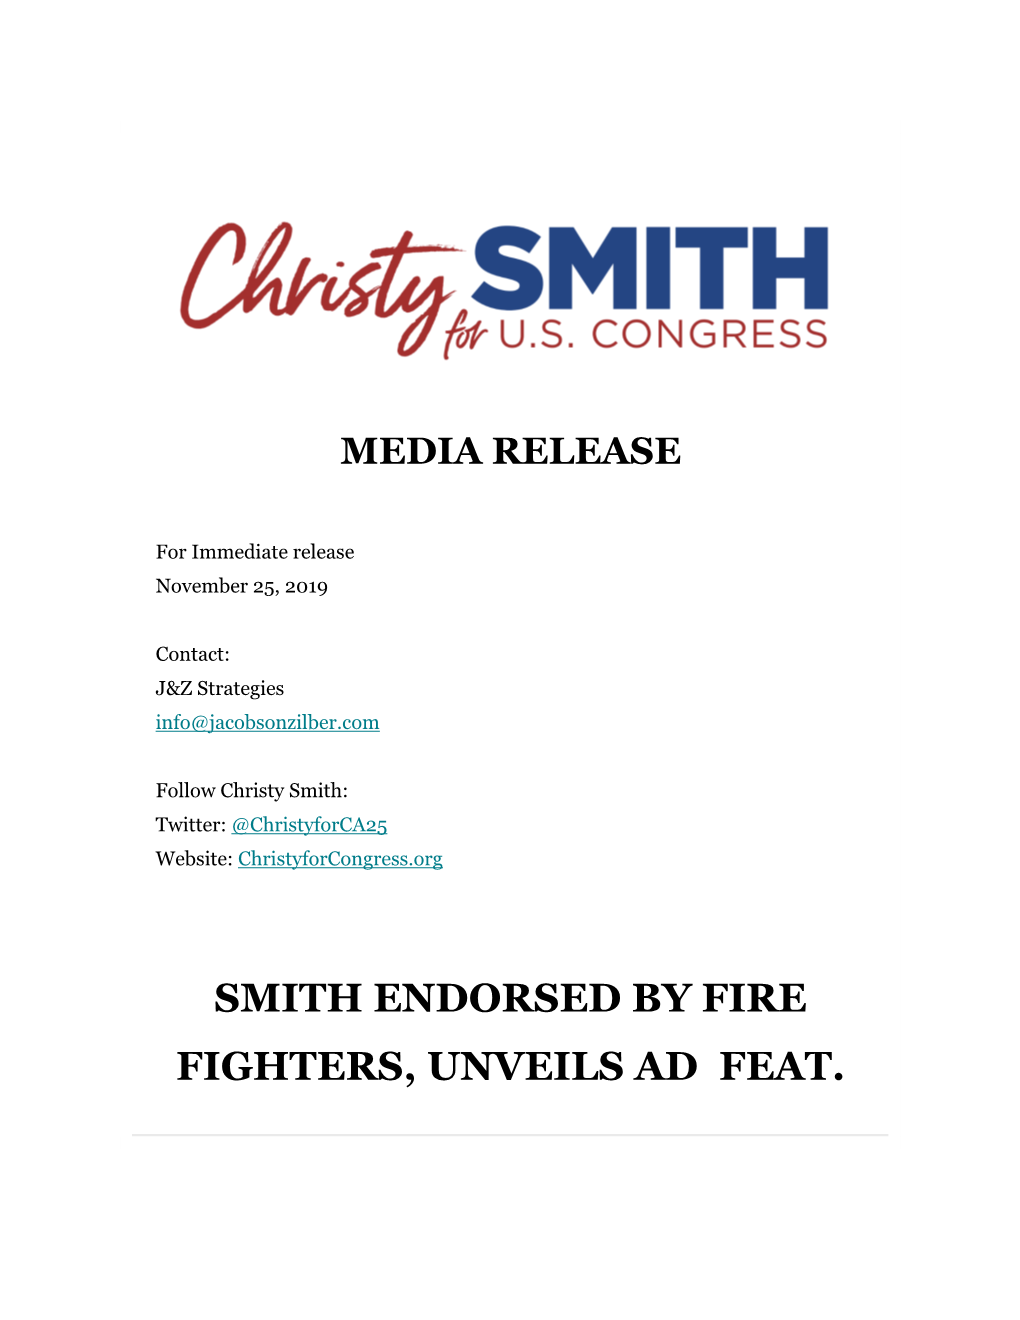 Smith Endorsed by Fire Fighters, Unveils Ad Feat. Ca-25 Wildfire Threat